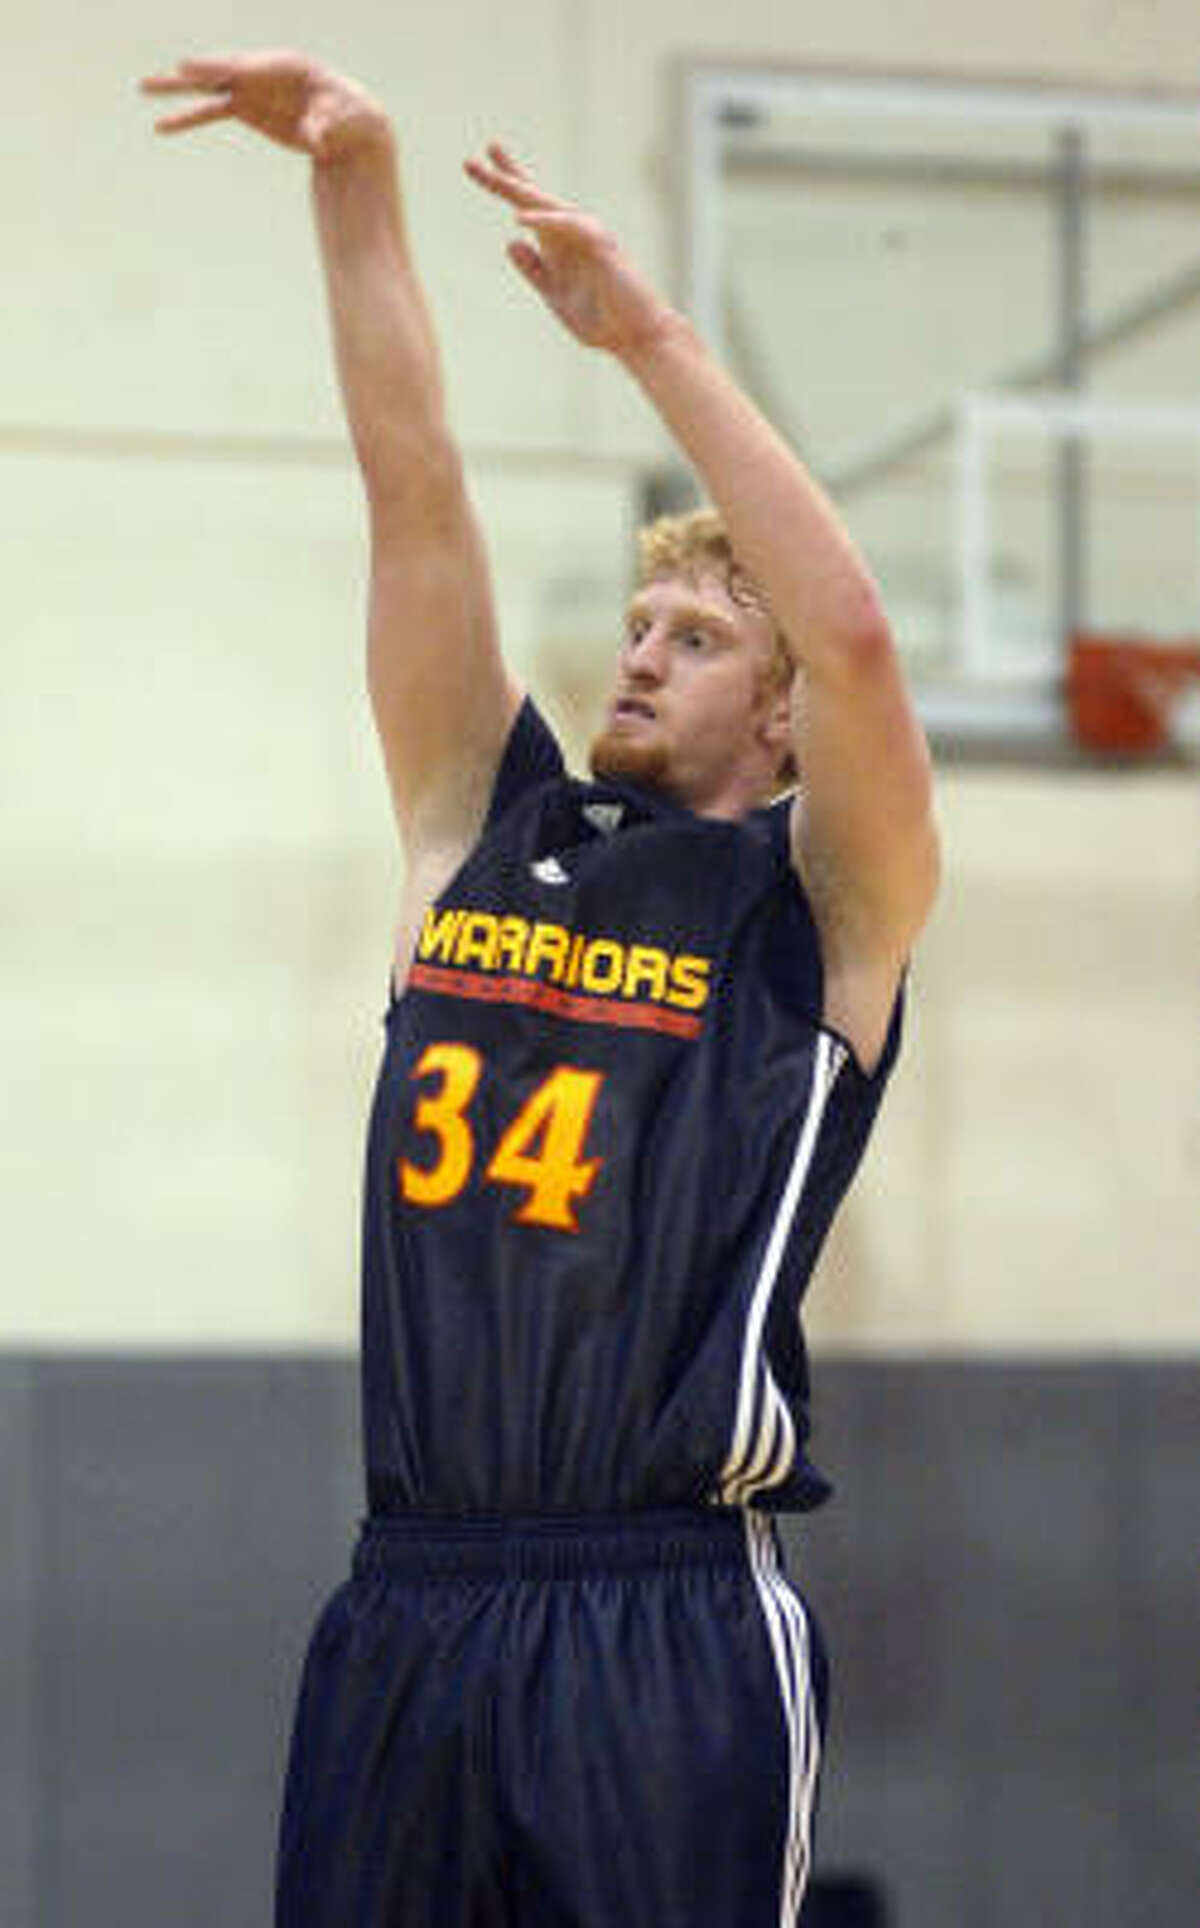 Chase Budinger, a 6-foot-7 forward from Arizona, shoots during the Golden State Warriors tryouts June 2 at their practice facility in Oakland, Calif.